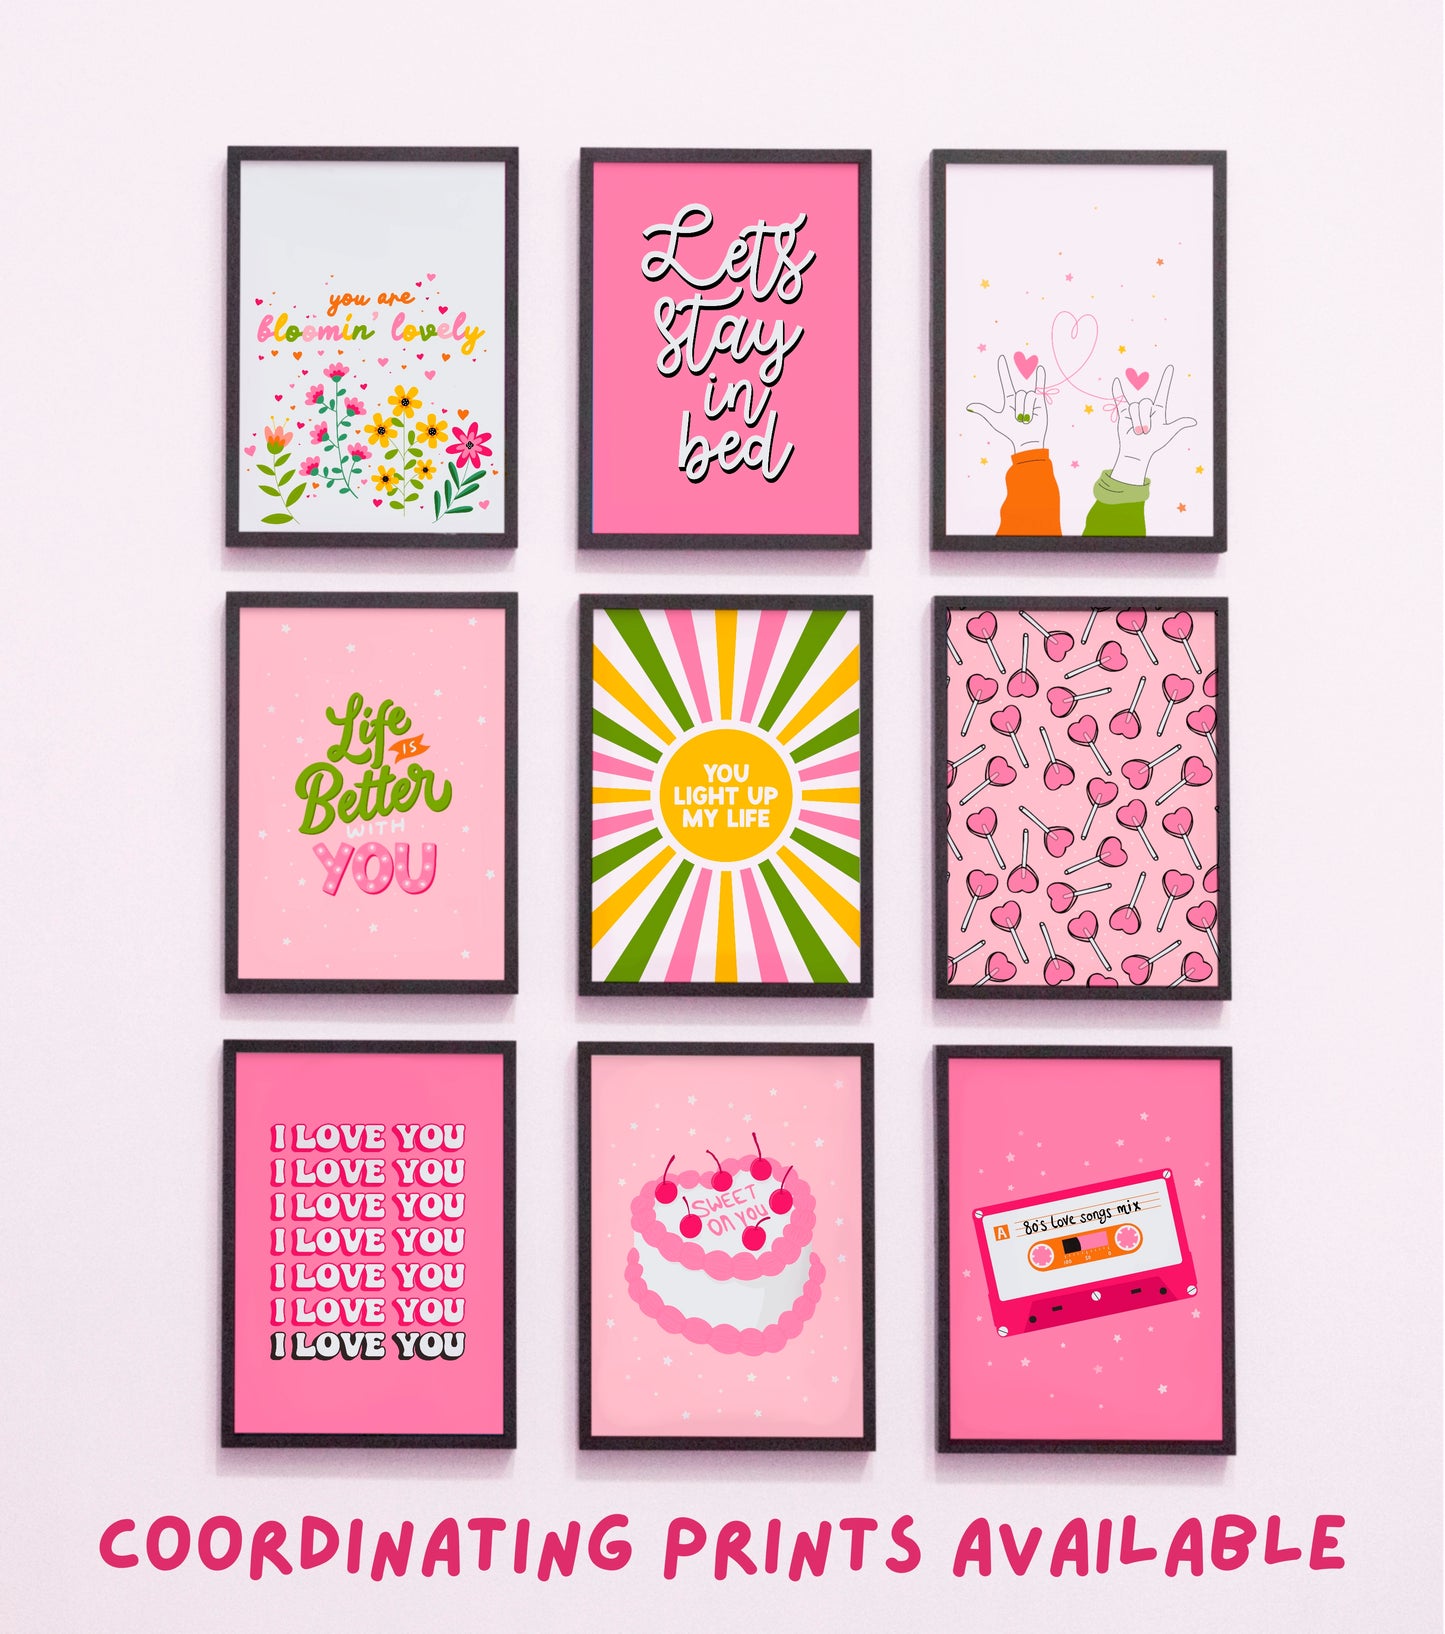 Sweet On You Print in Pink and White